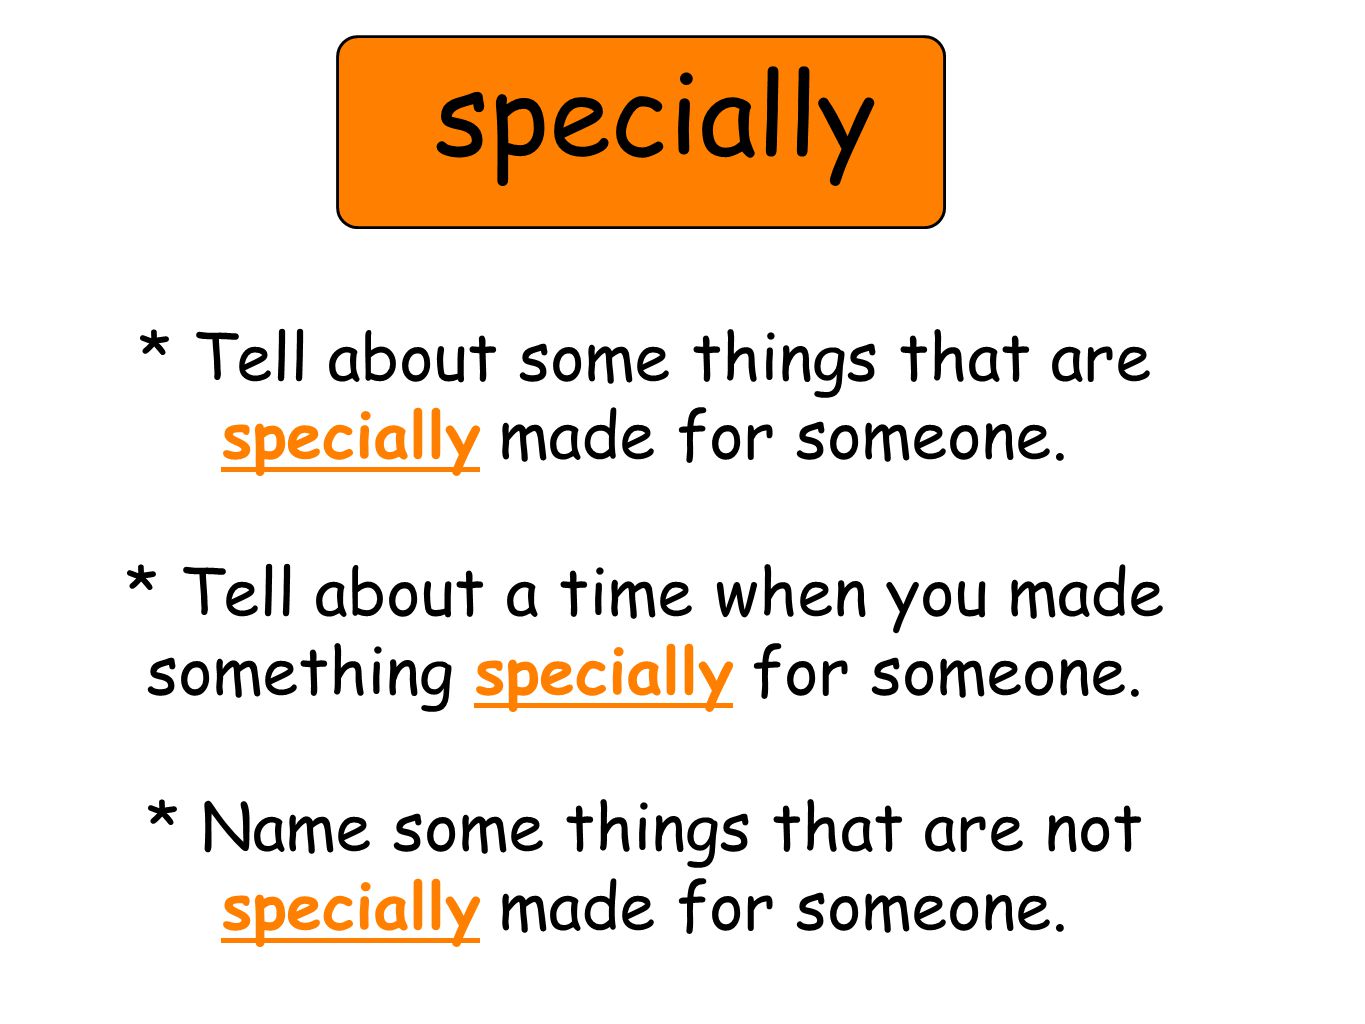 * Tell about some things that are specially made for someone.